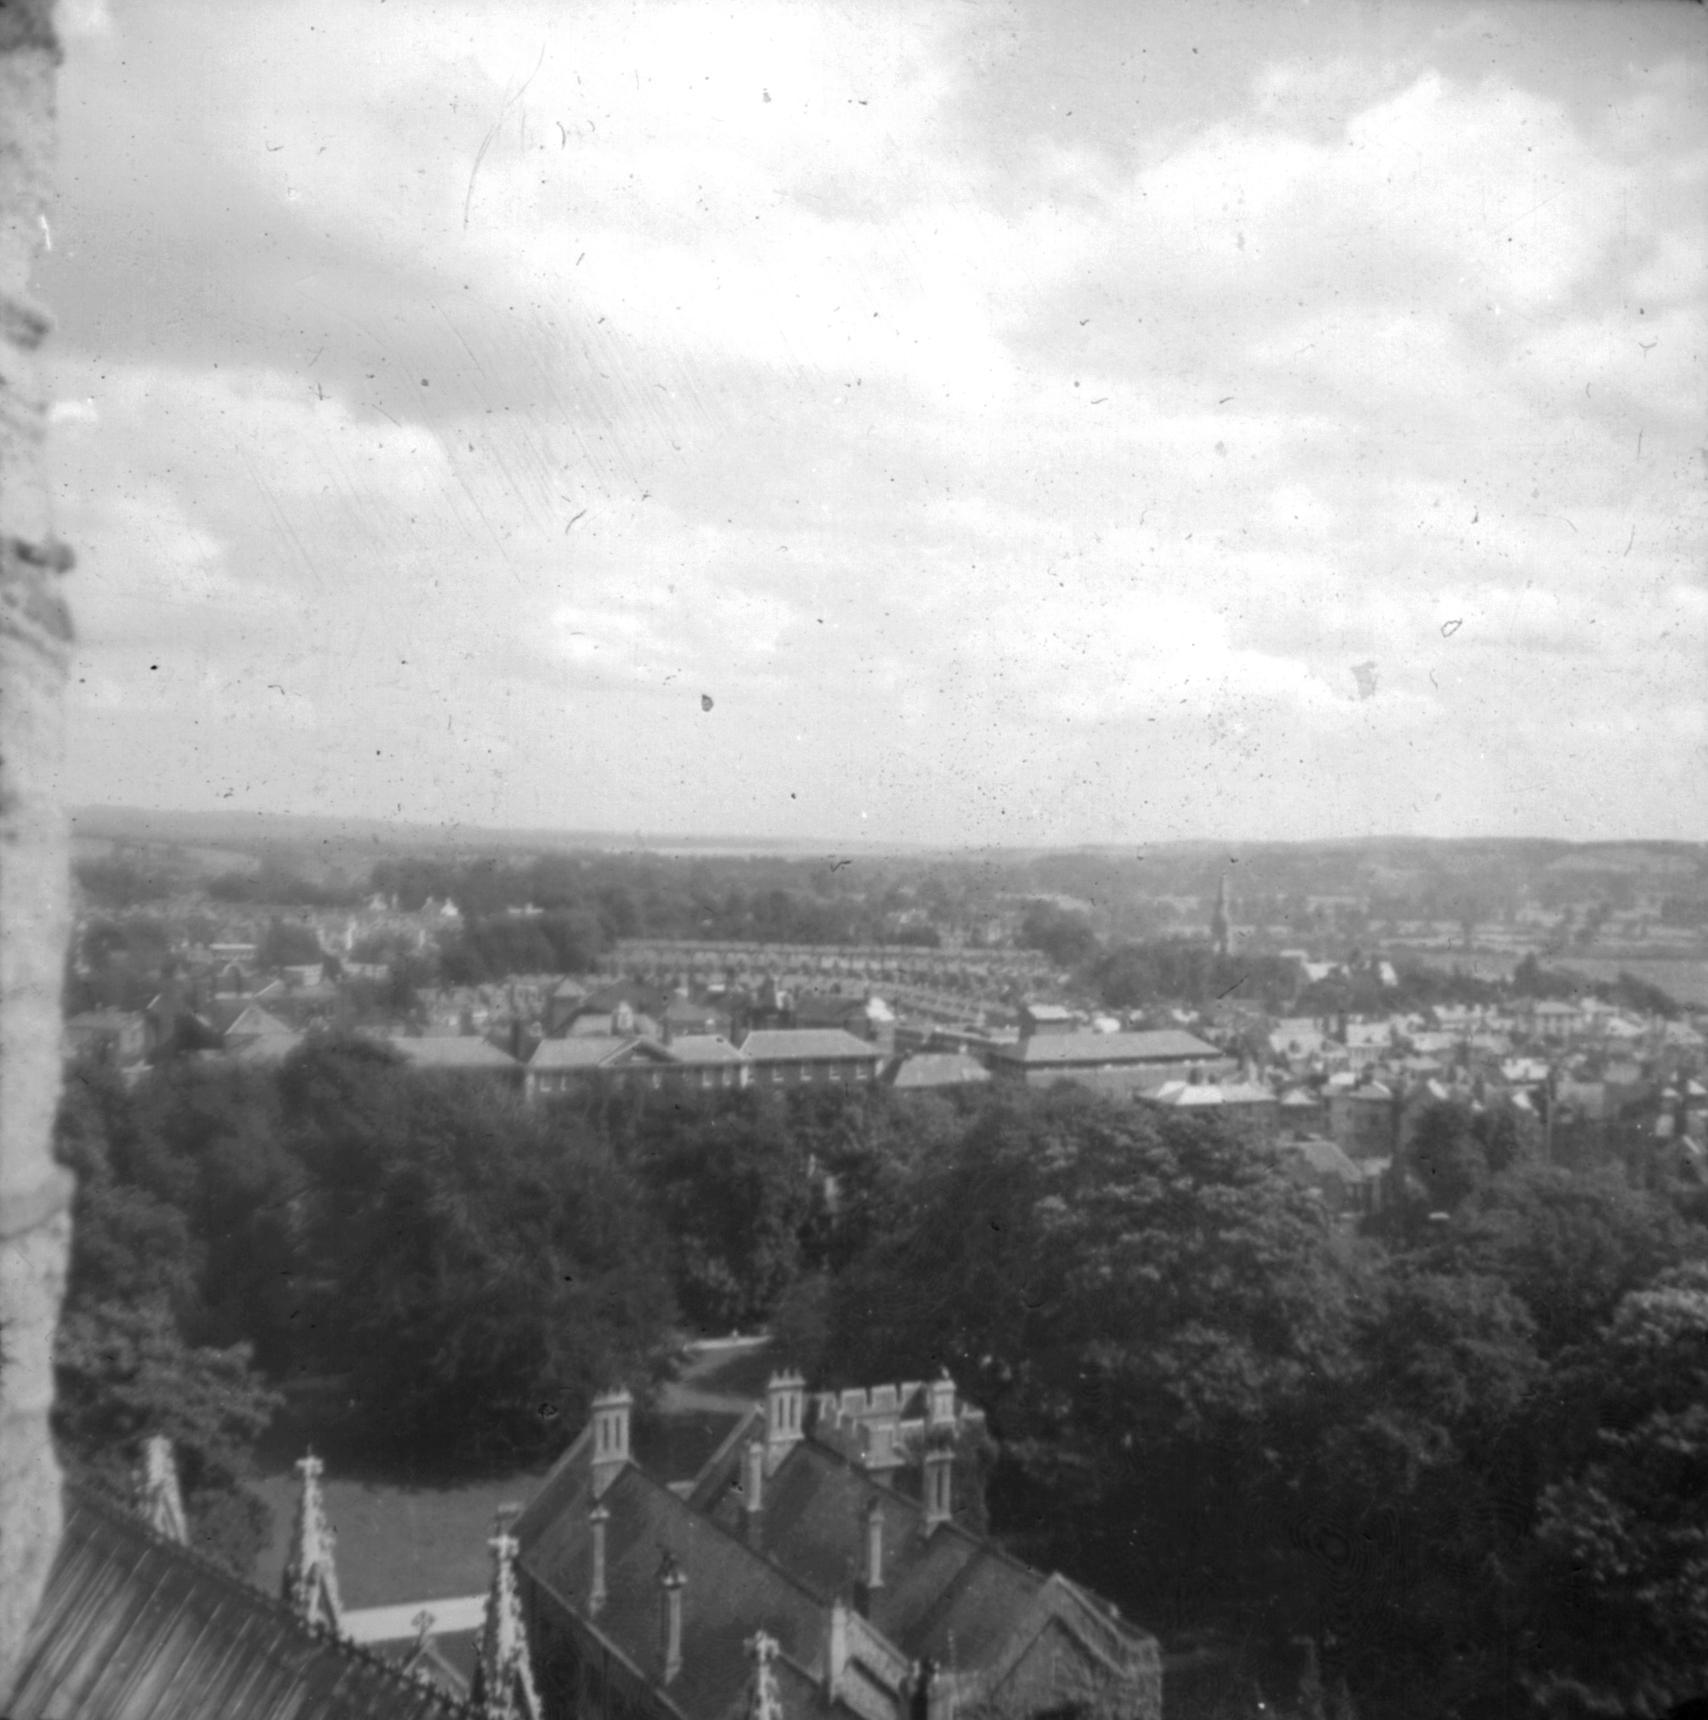 South East view from South tower, including Bishop's Palace. August 1941.